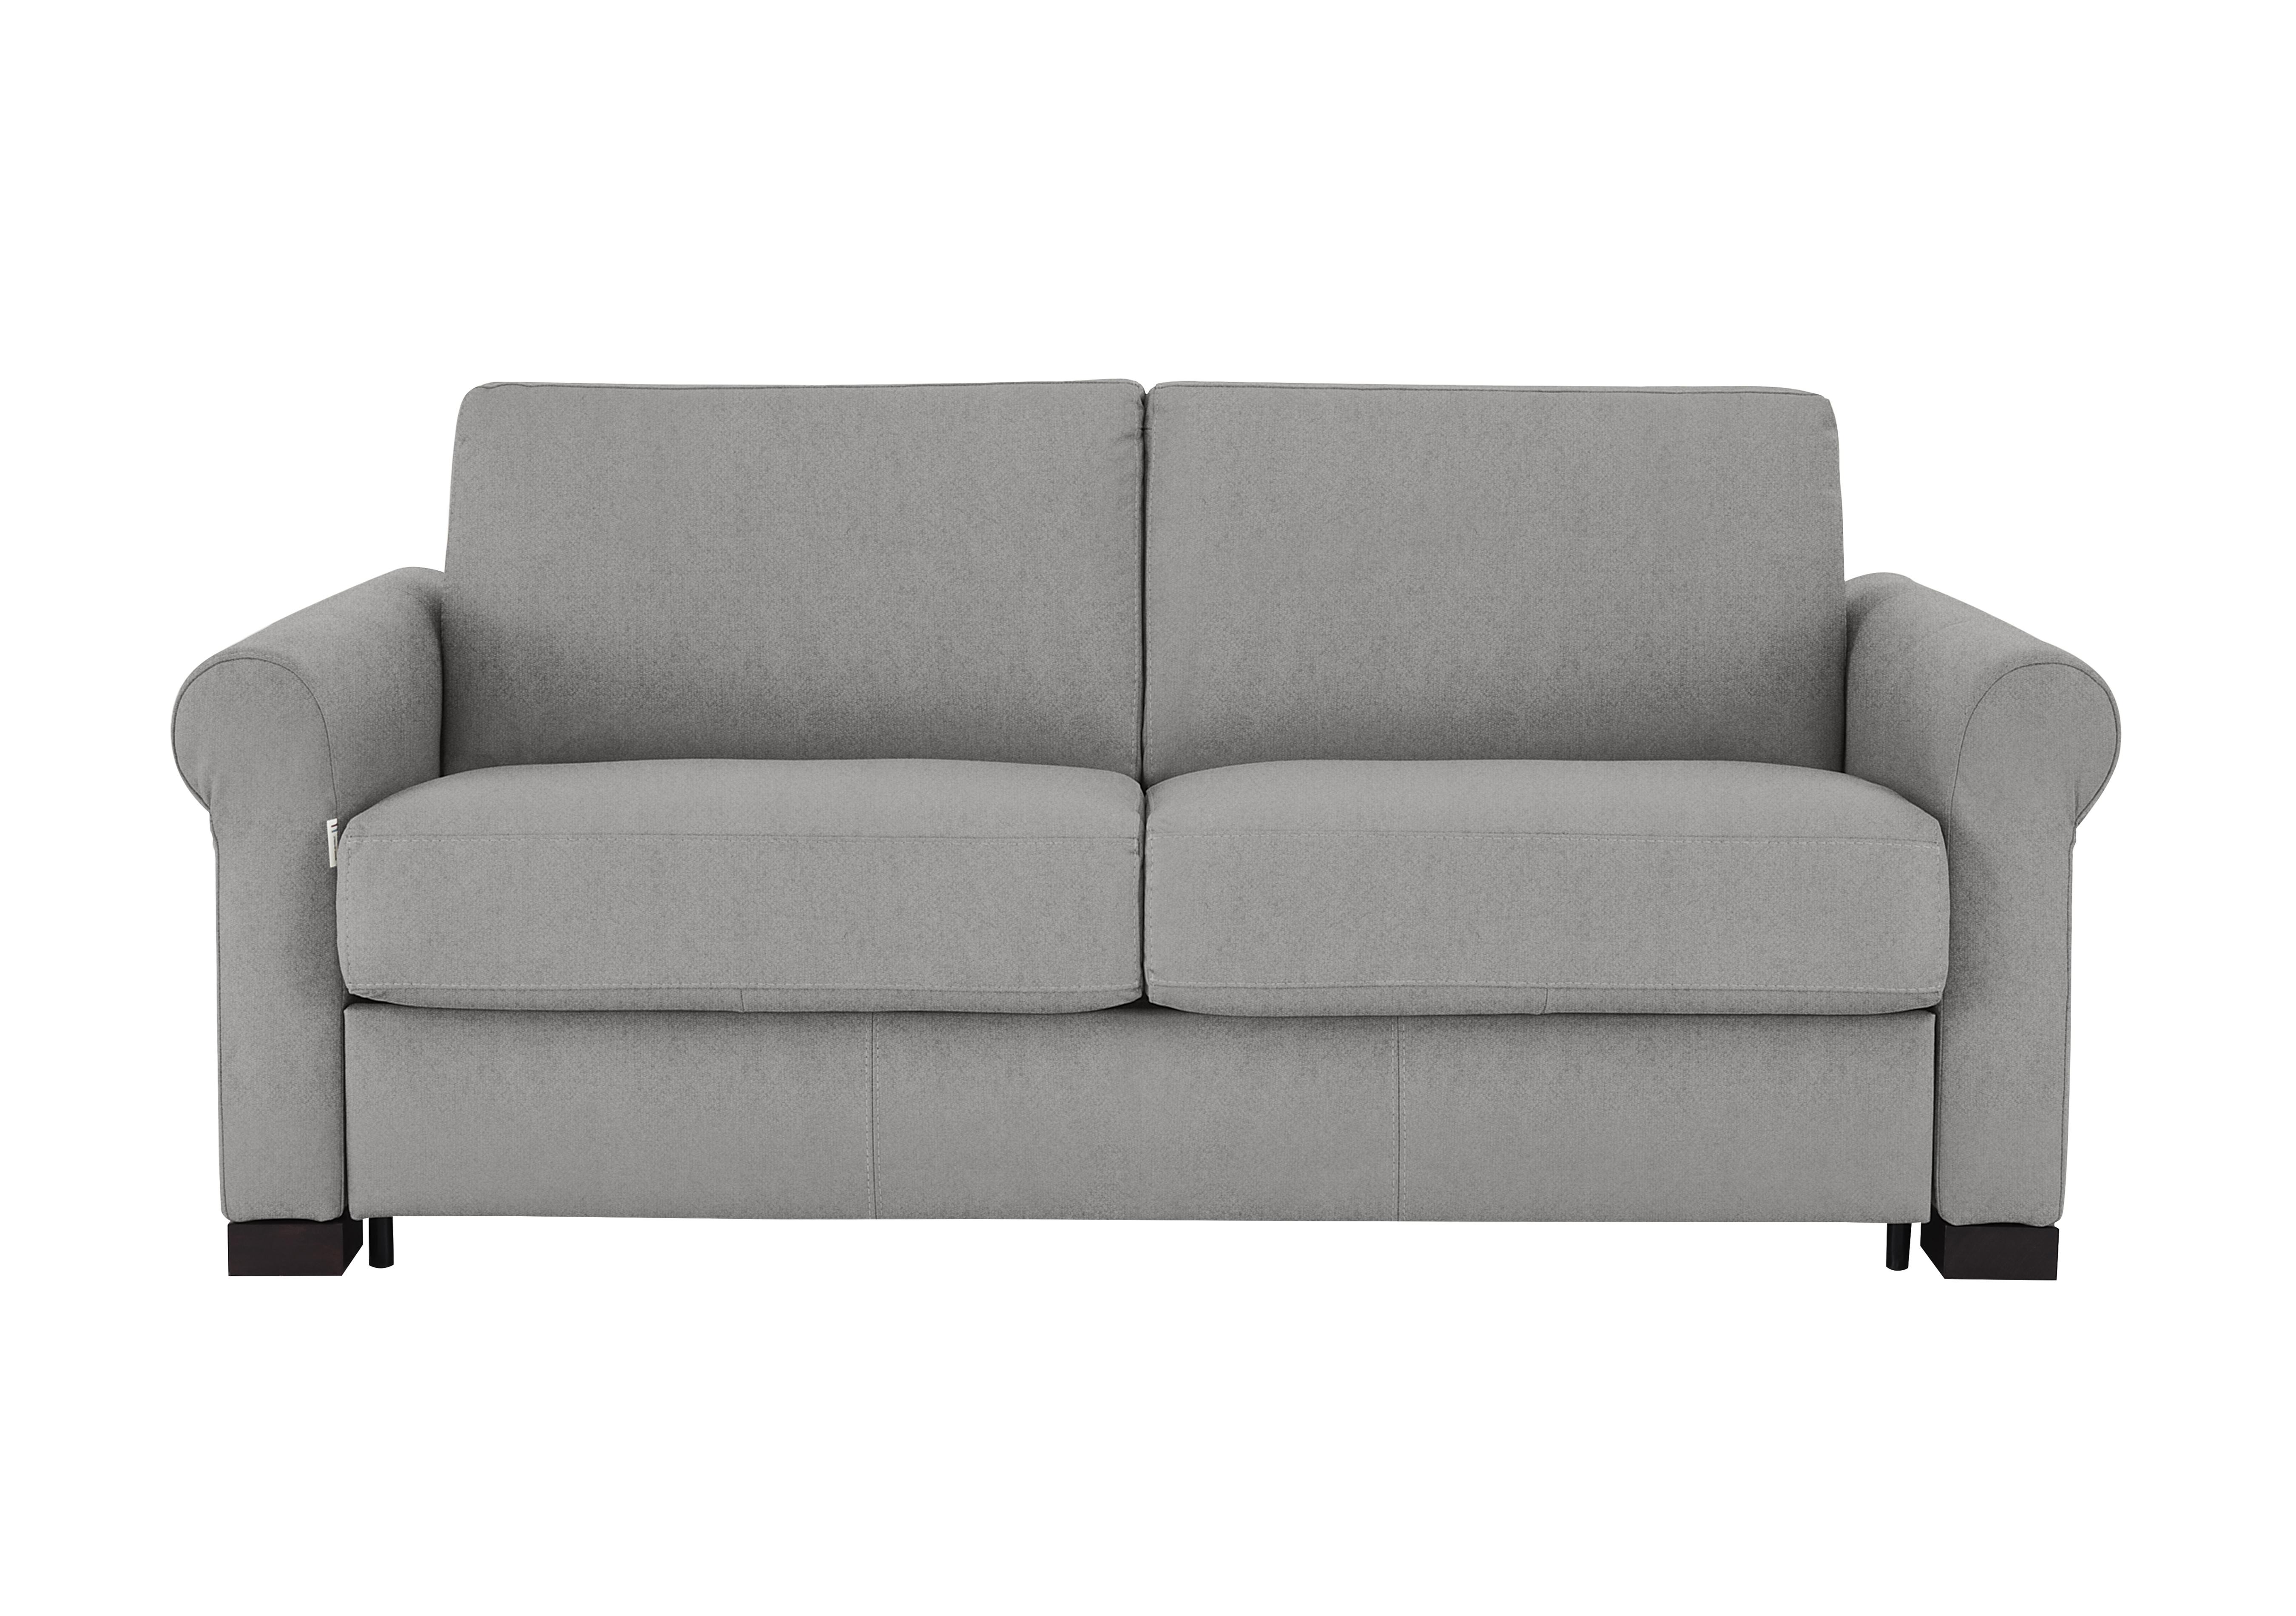 Alcova 2.5 Seater Fabric Sofa Bed with Scroll Arms in Fuente Ash on Furniture Village